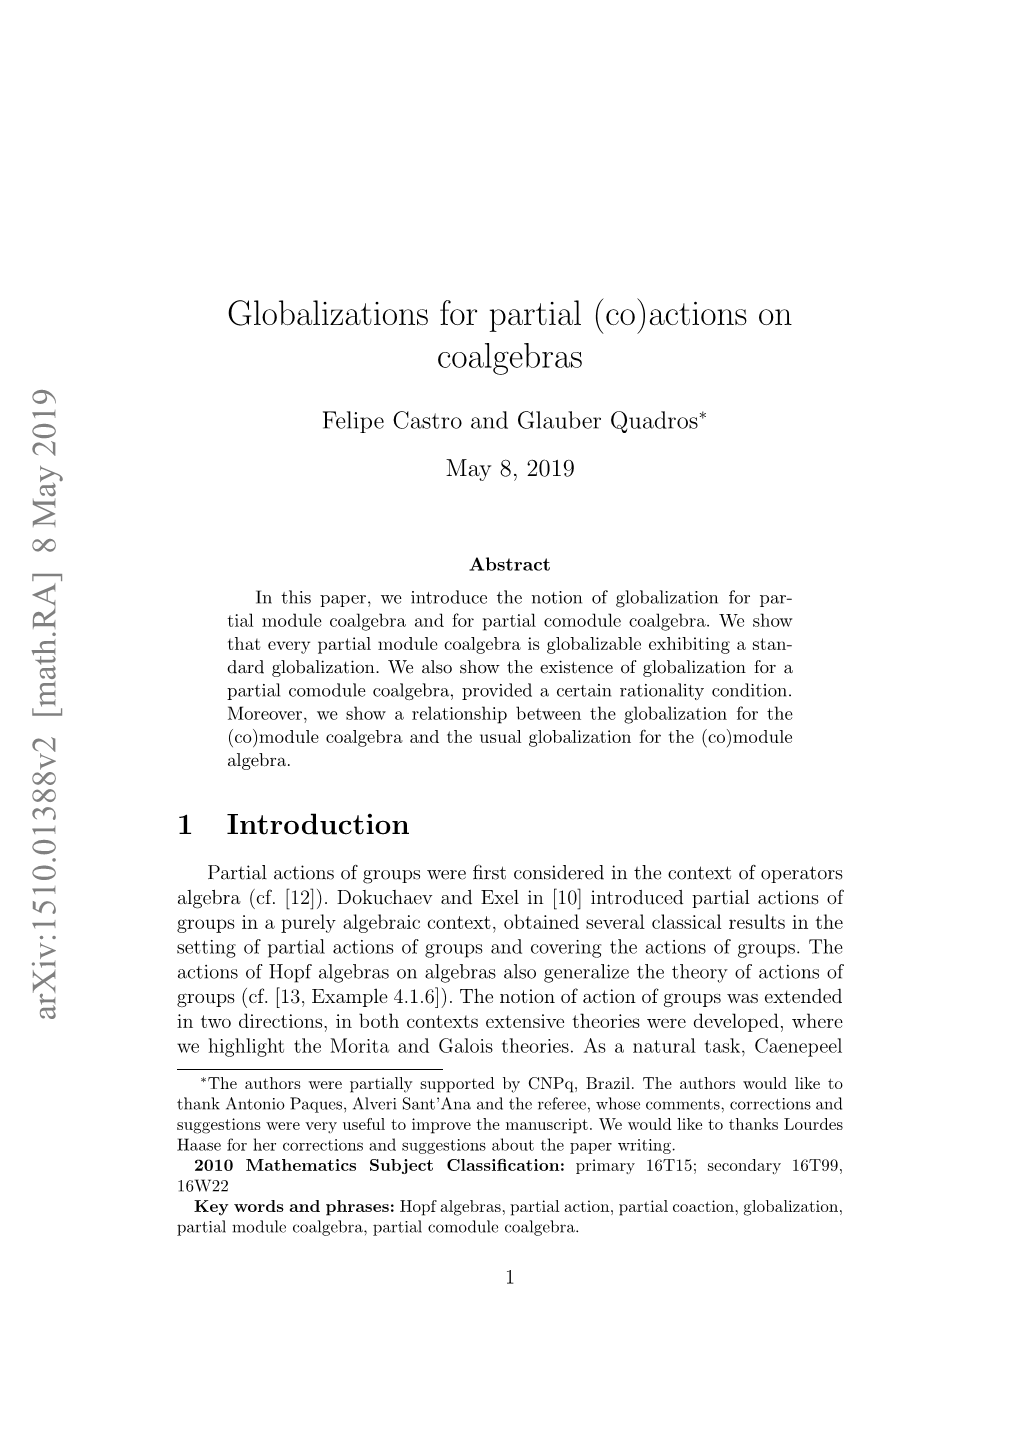 Globalizations for Partial (Co) Actions on Coalgebras